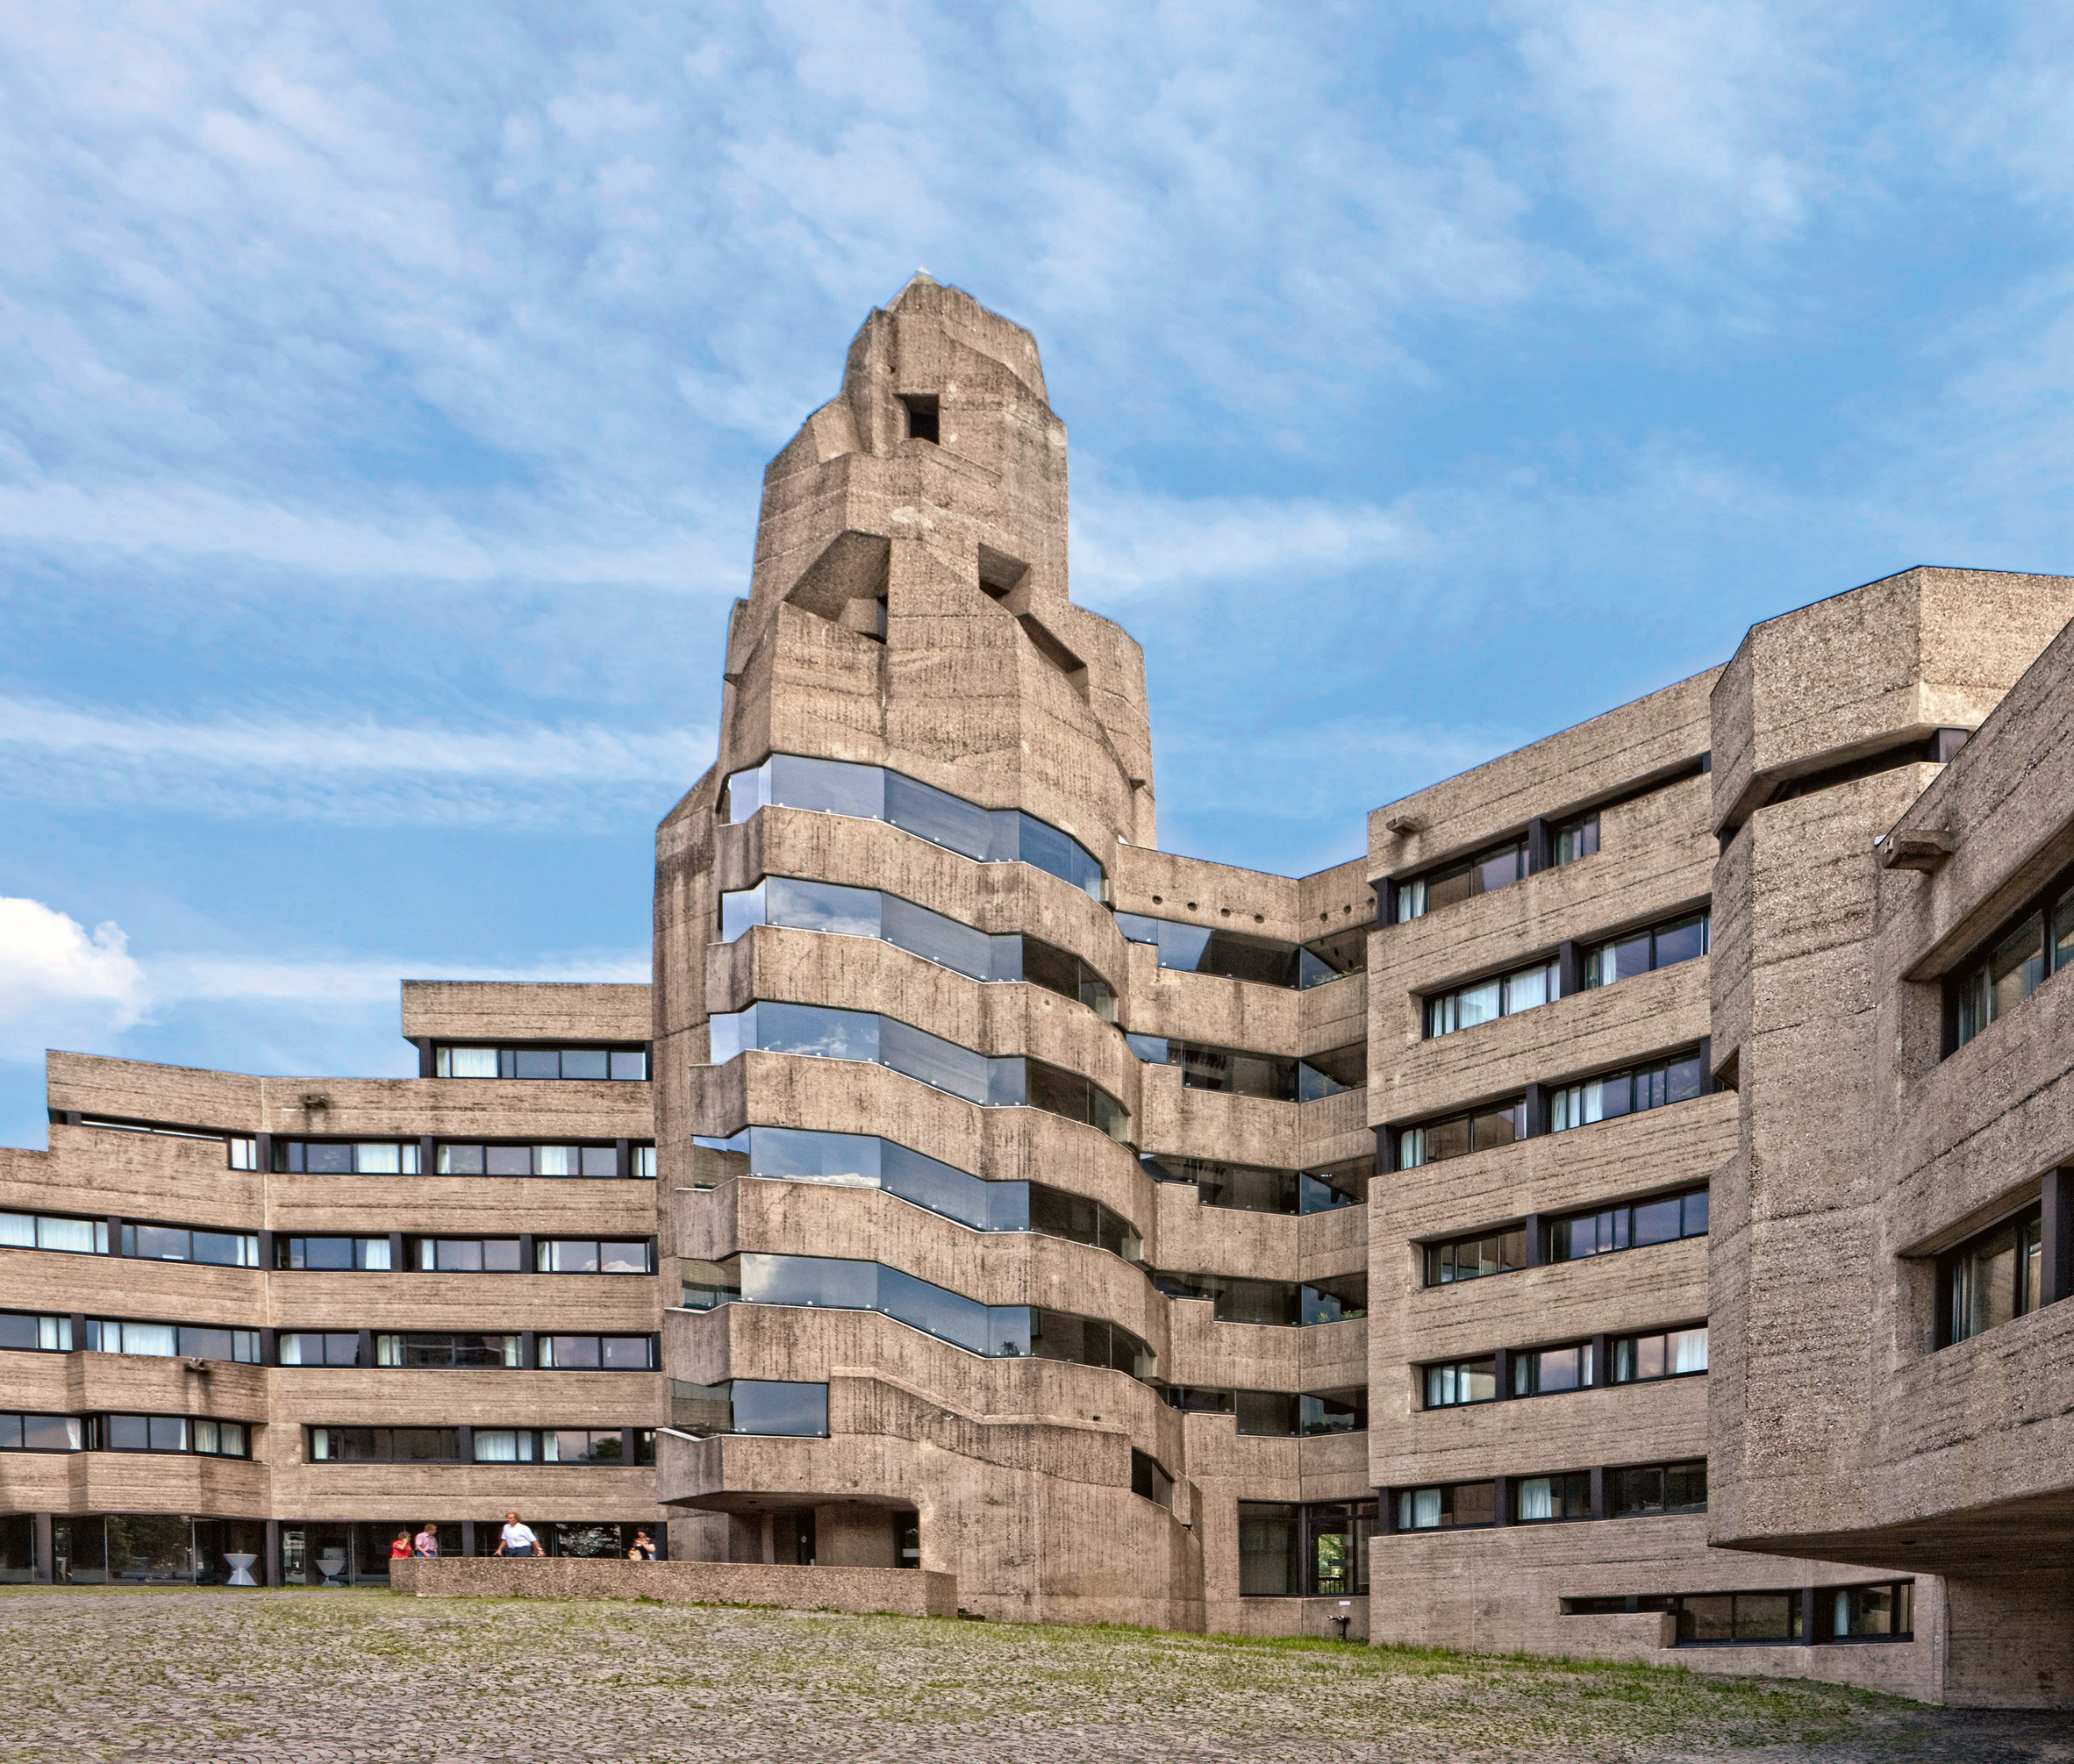 Breaking Ground: Architecture by Women: Bensberg Town Hall, Germany, 1967 by Elisabeth Böhm